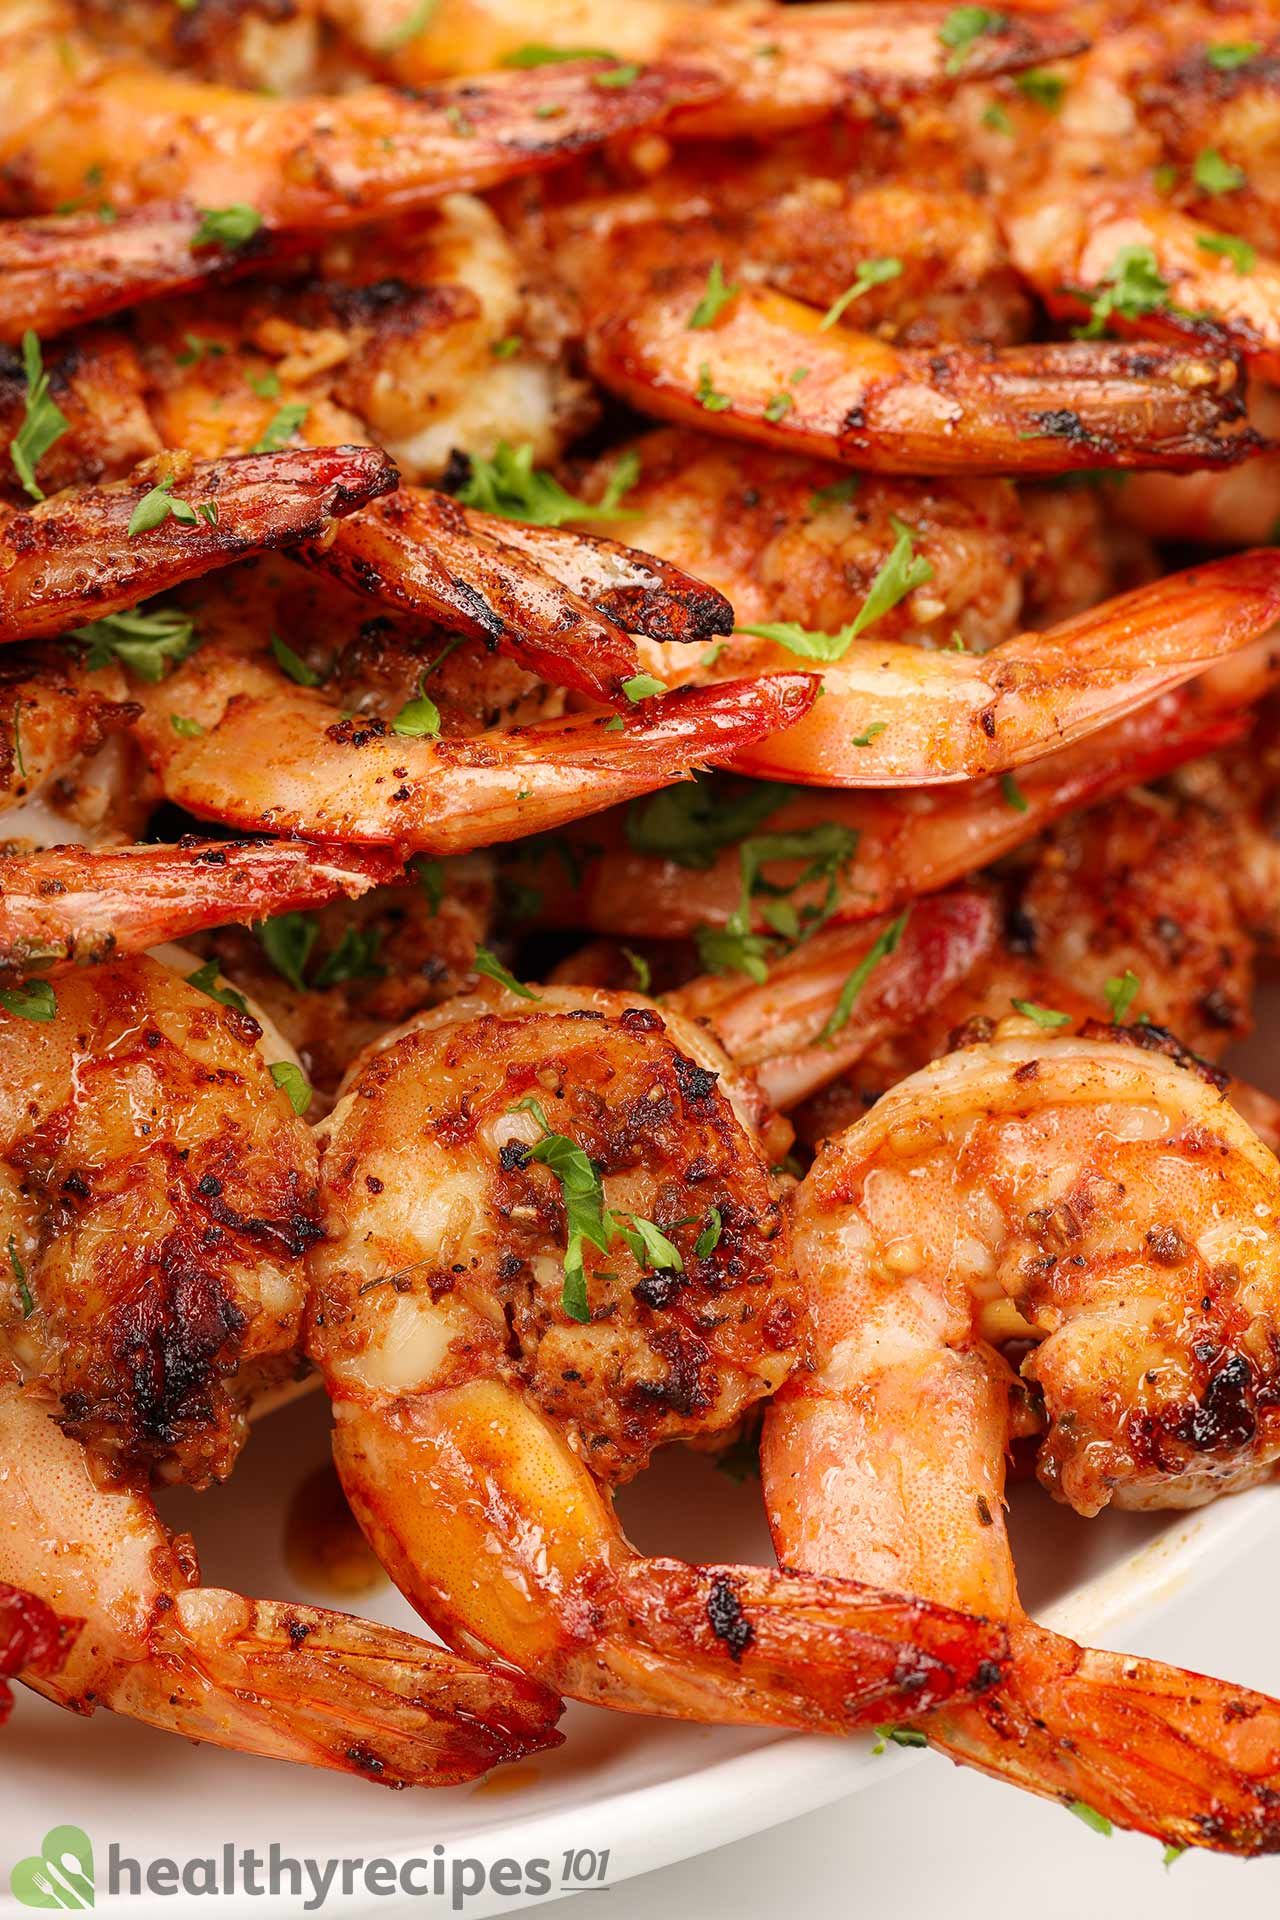 Is This Grilled Shrimp Recipe Healthy